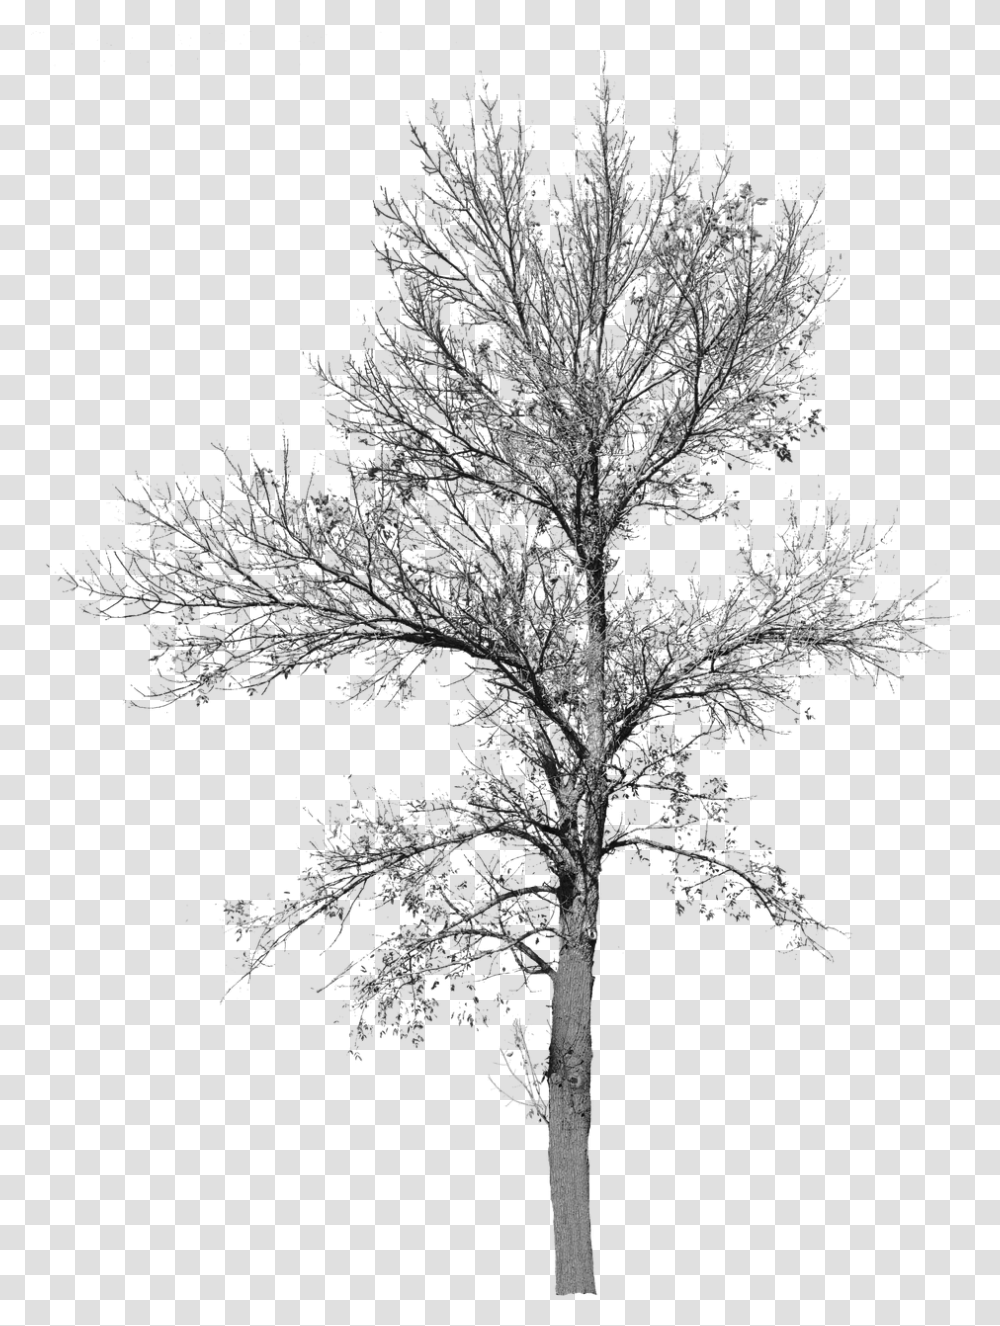 Tree With No Leaves Background Bare Cut Out Tree No Leaves, Cross, Symbol, Plant, Nature Transparent Png